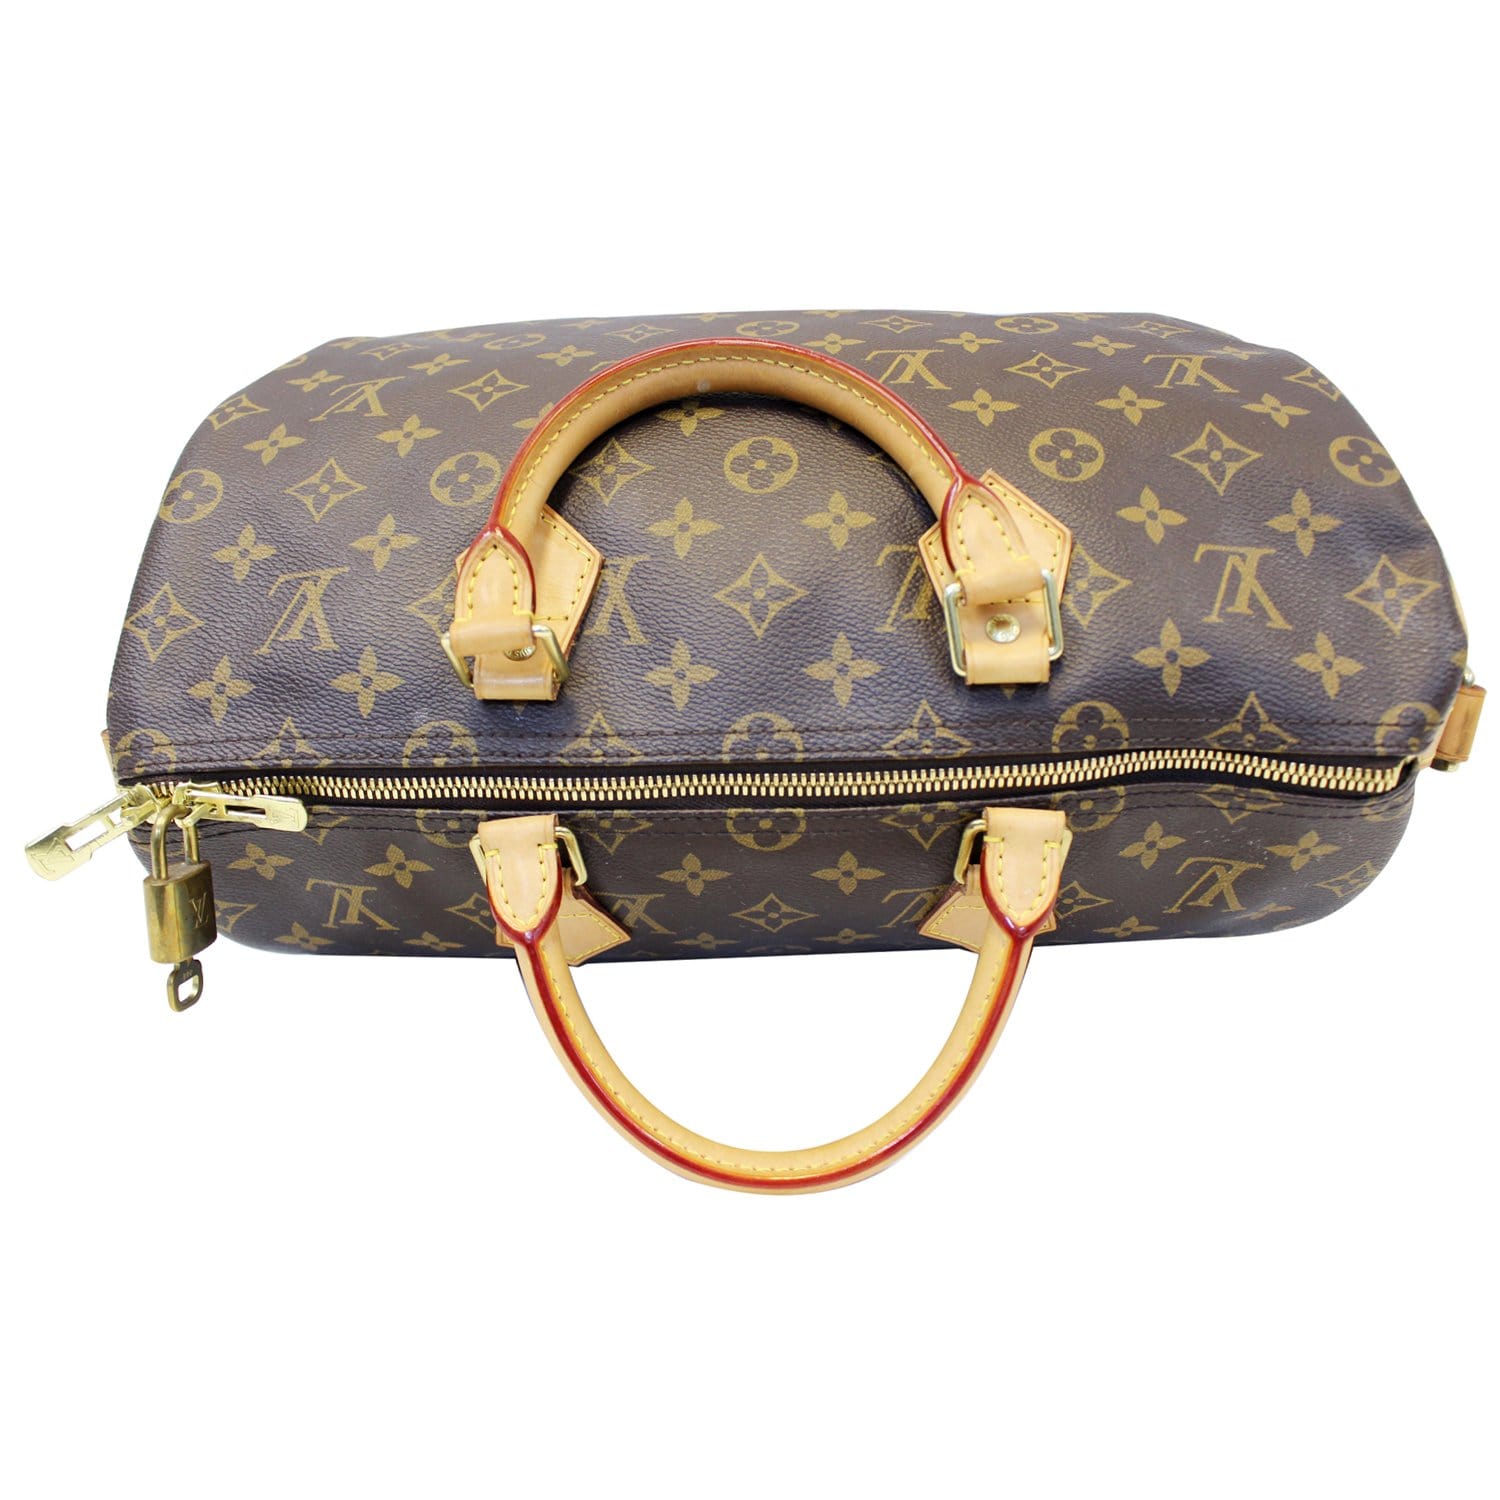 How To Spot Authentic Louis Vuitton Speedy 35 Monogram and Where